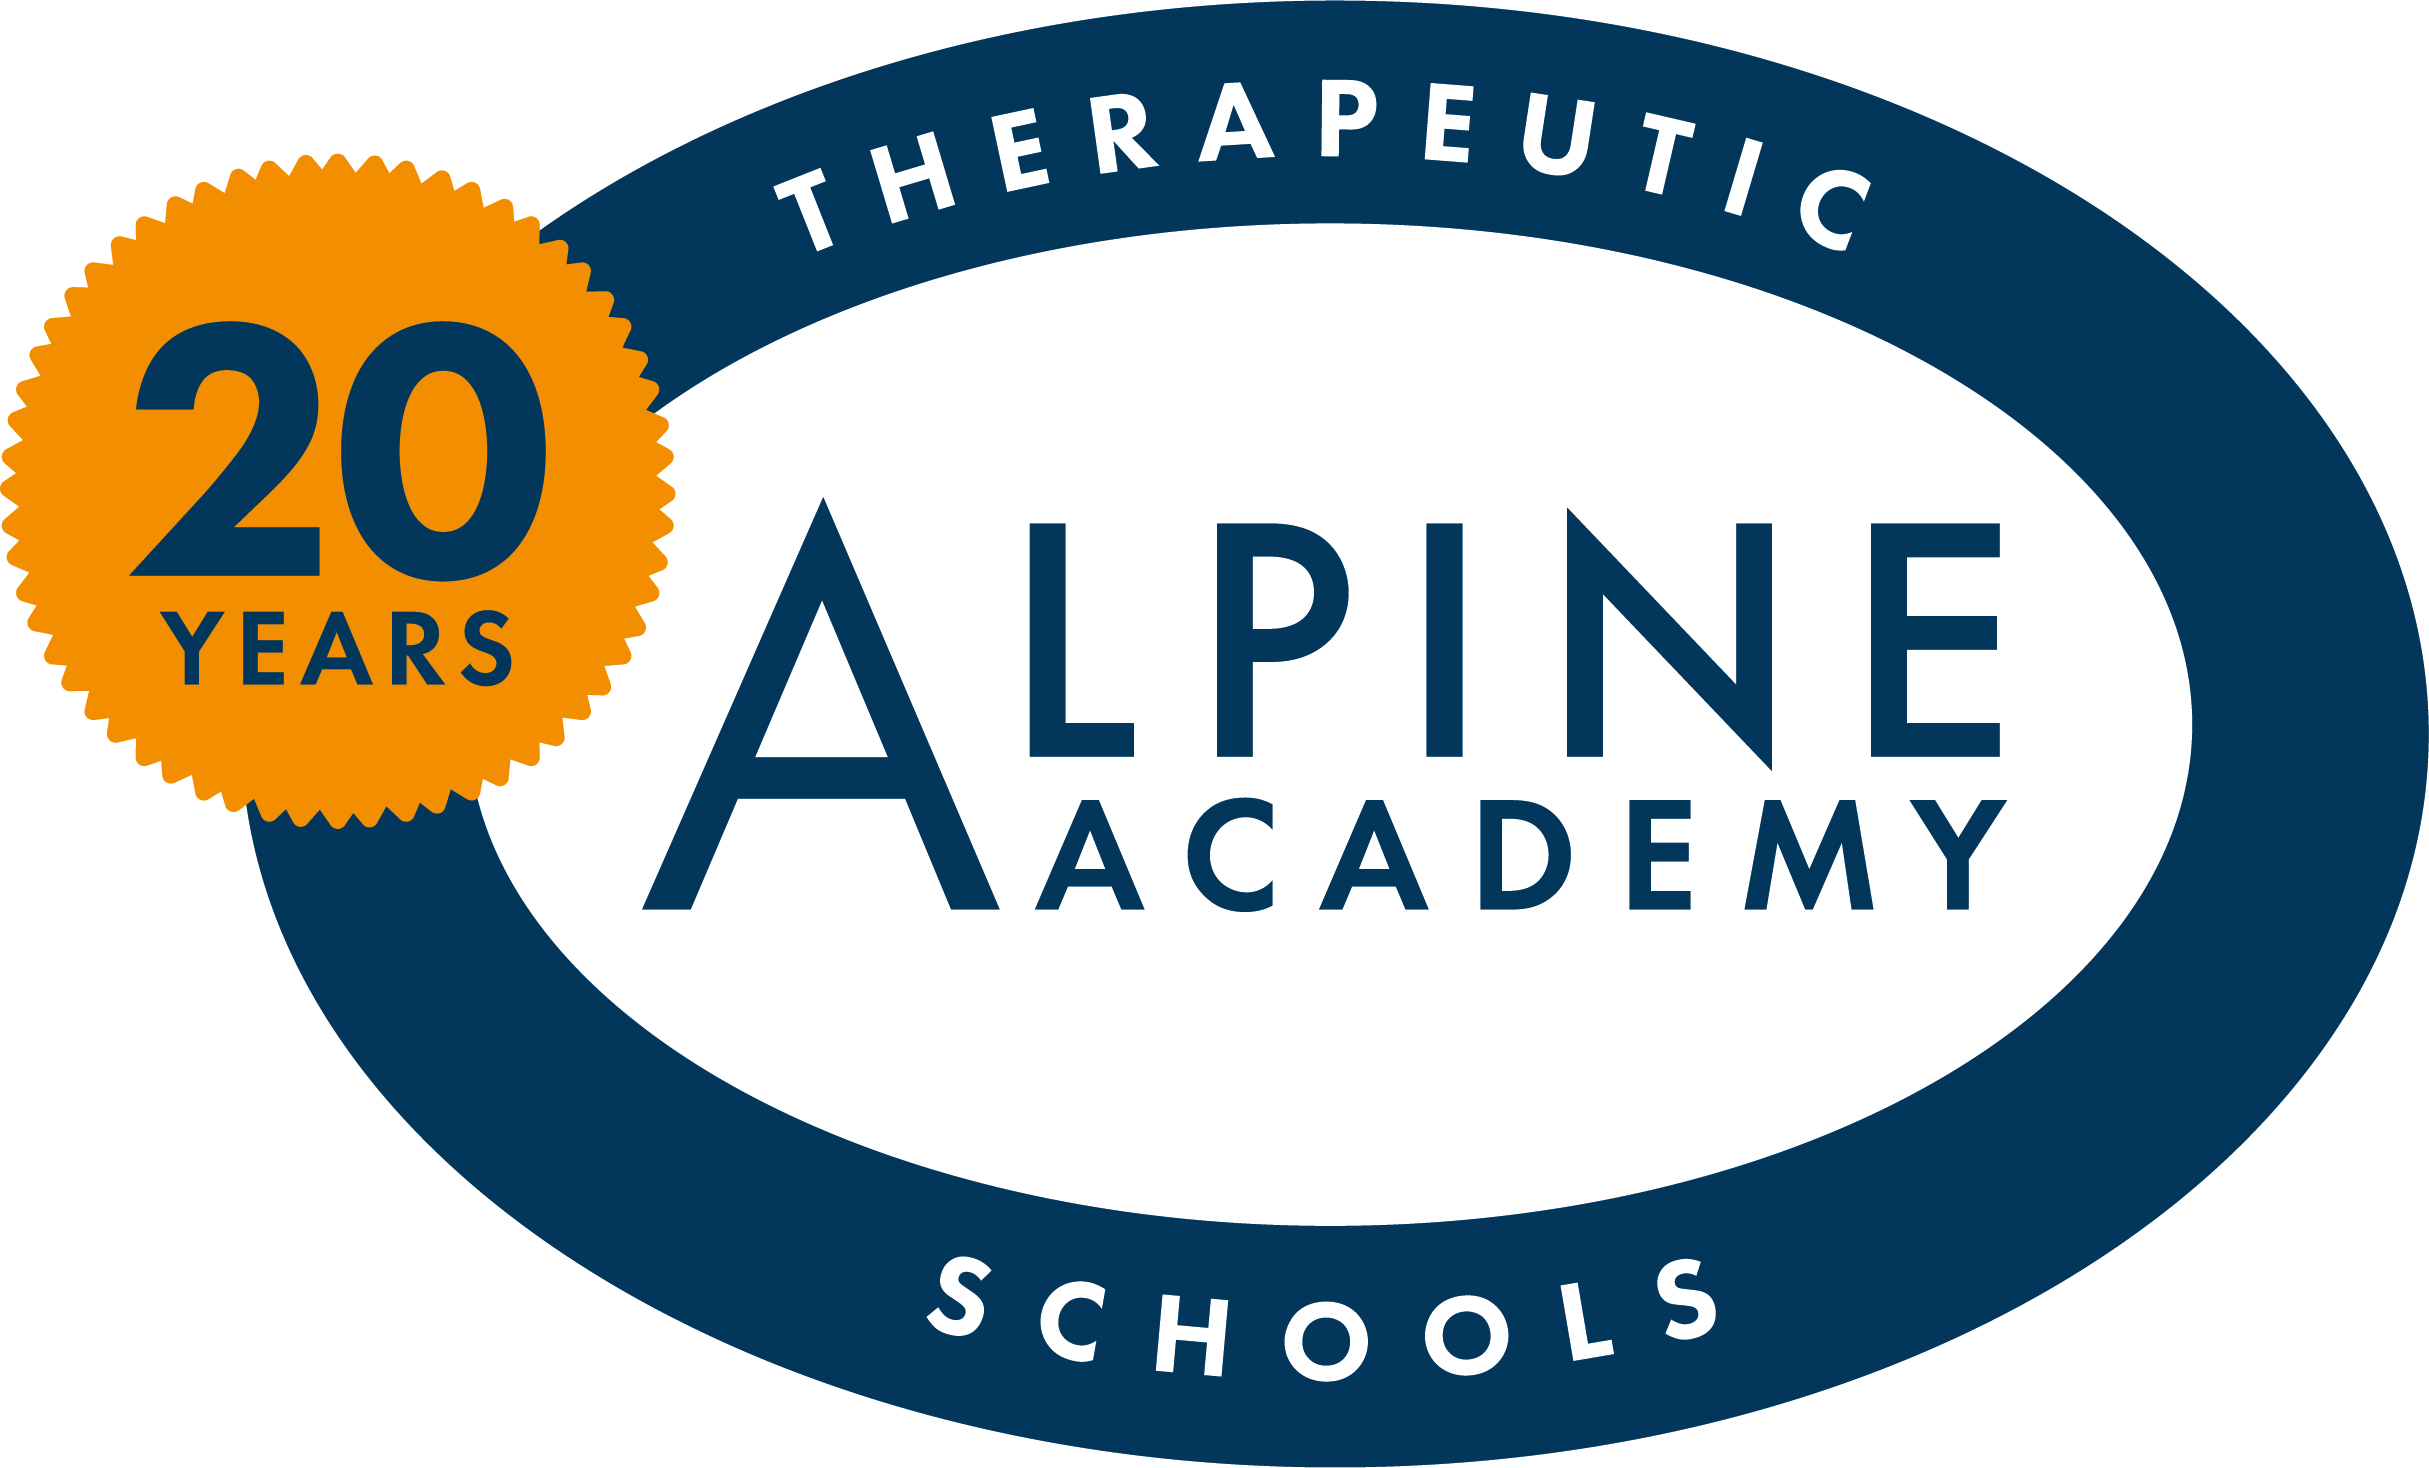 Logo for Alpine Academy Therapeutic Schools - 20 years